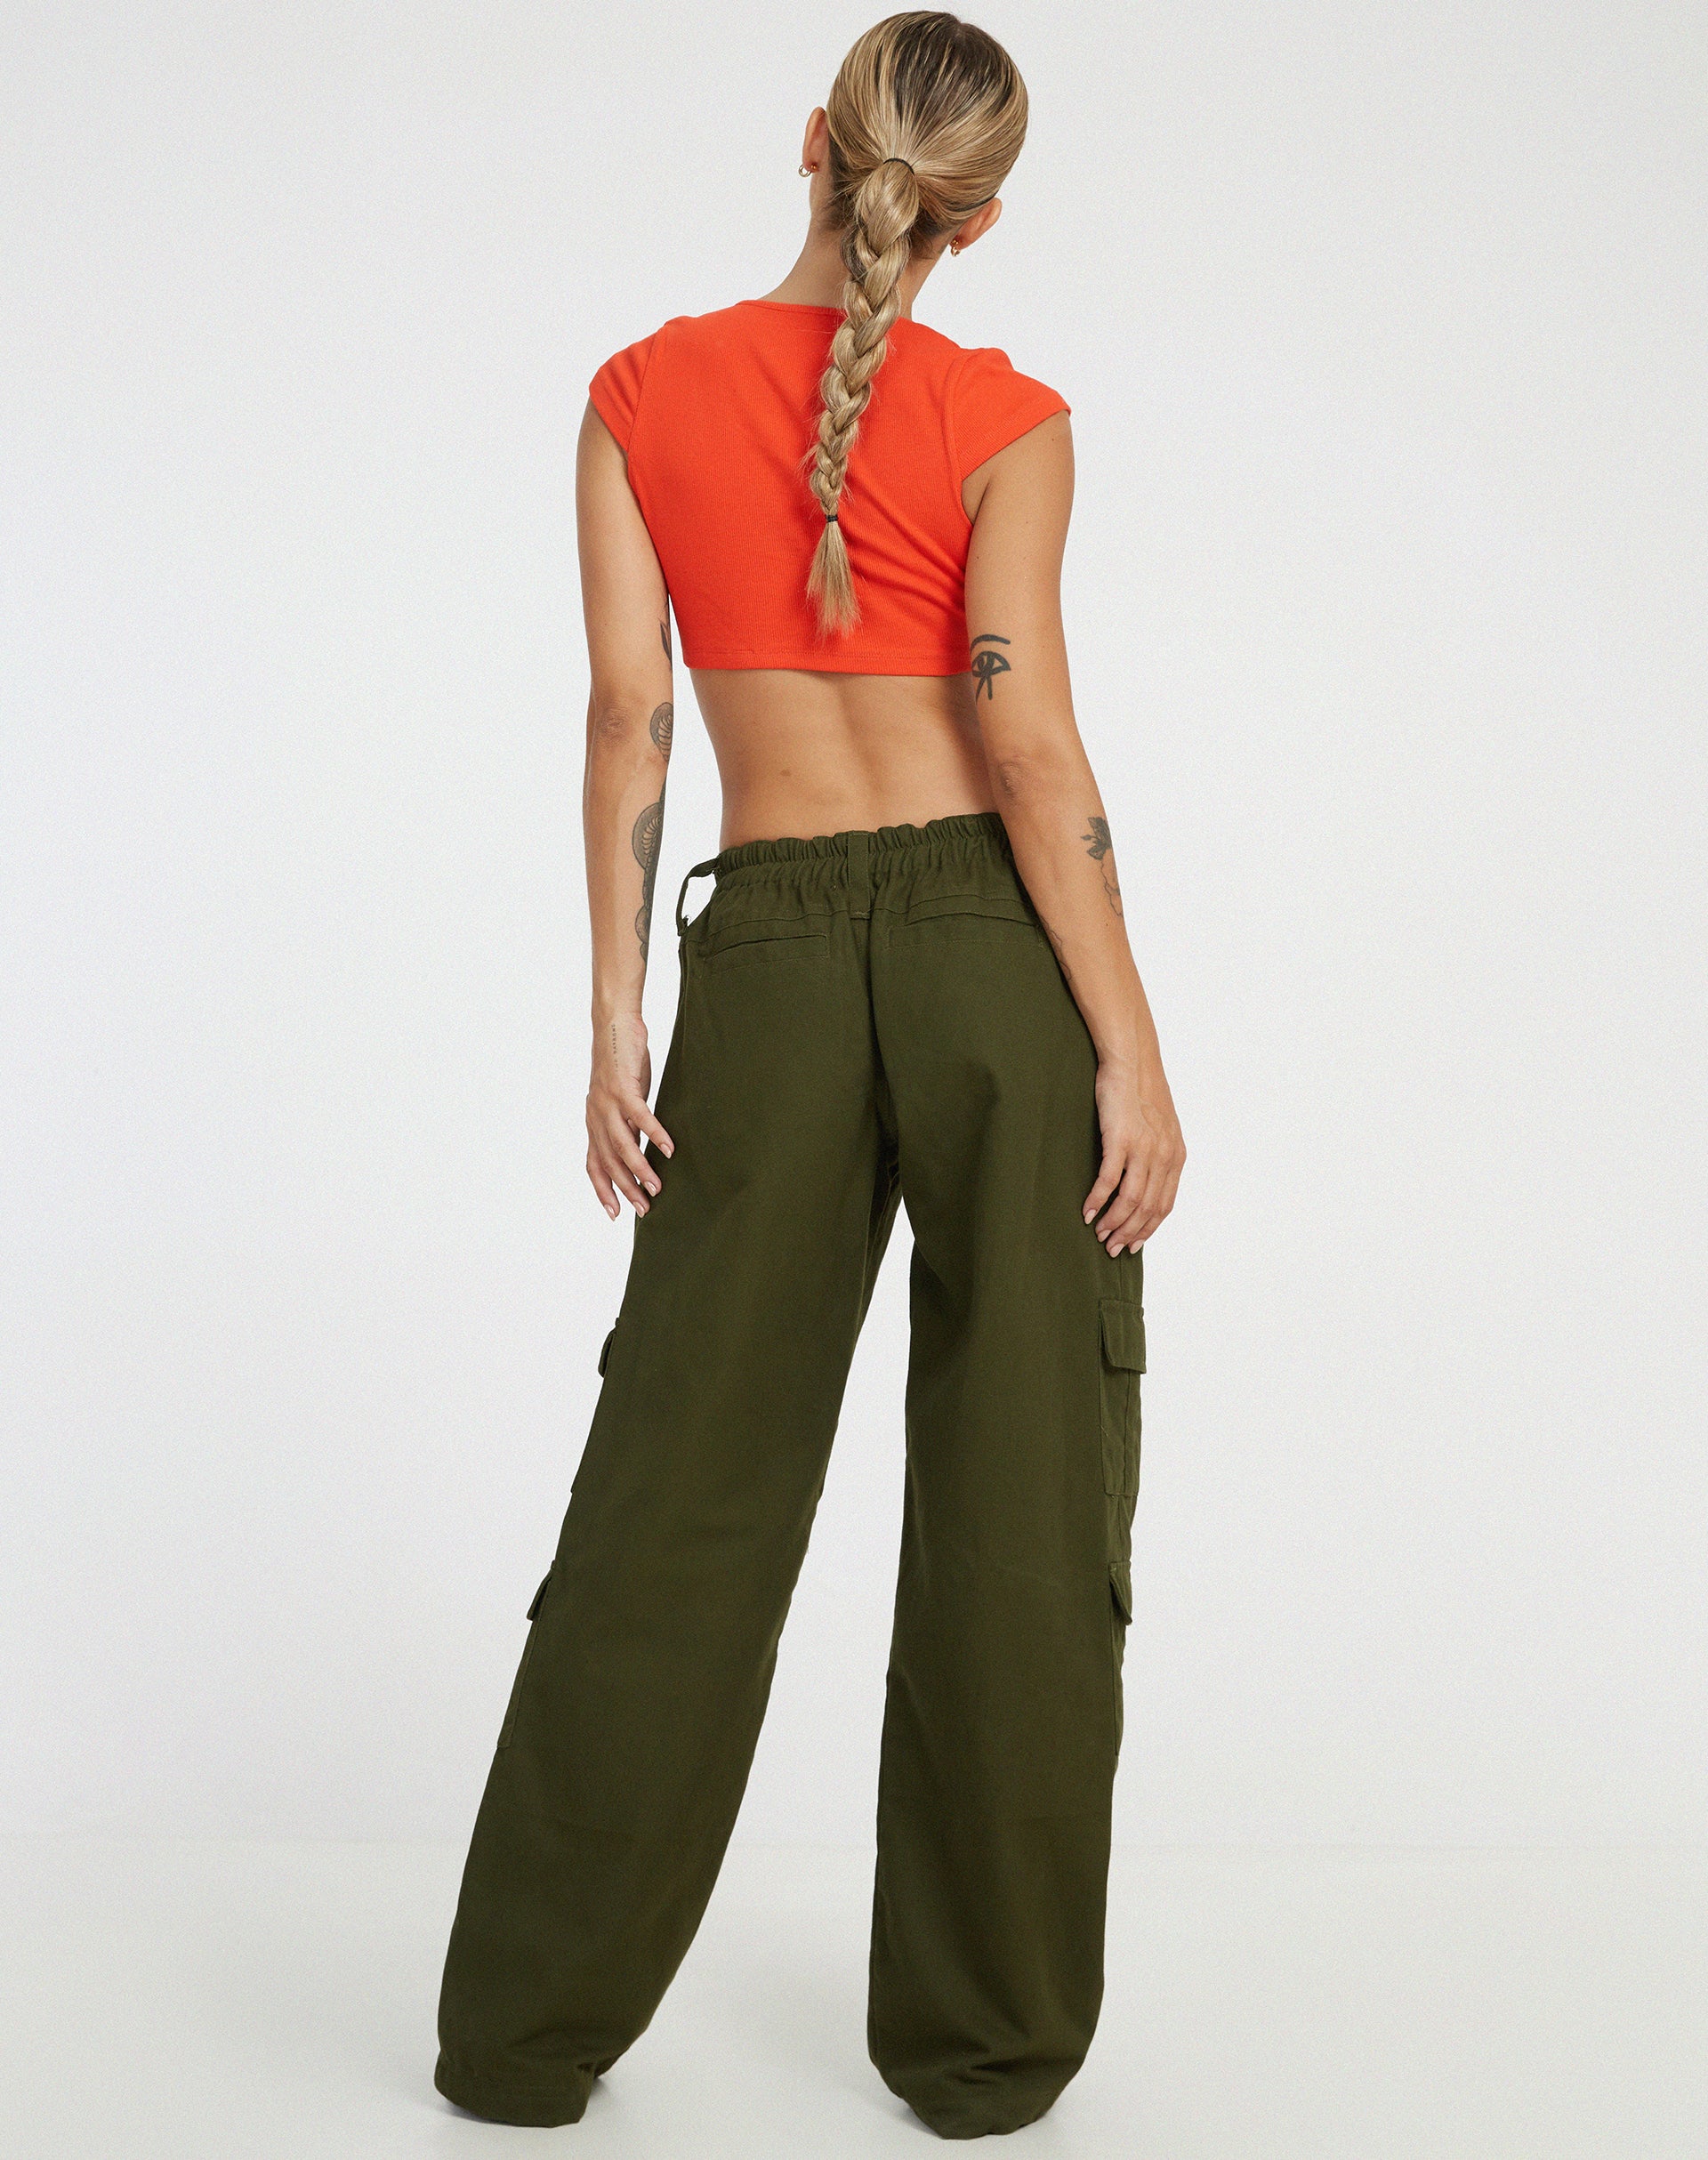 image of Guanna Crop Top in Red